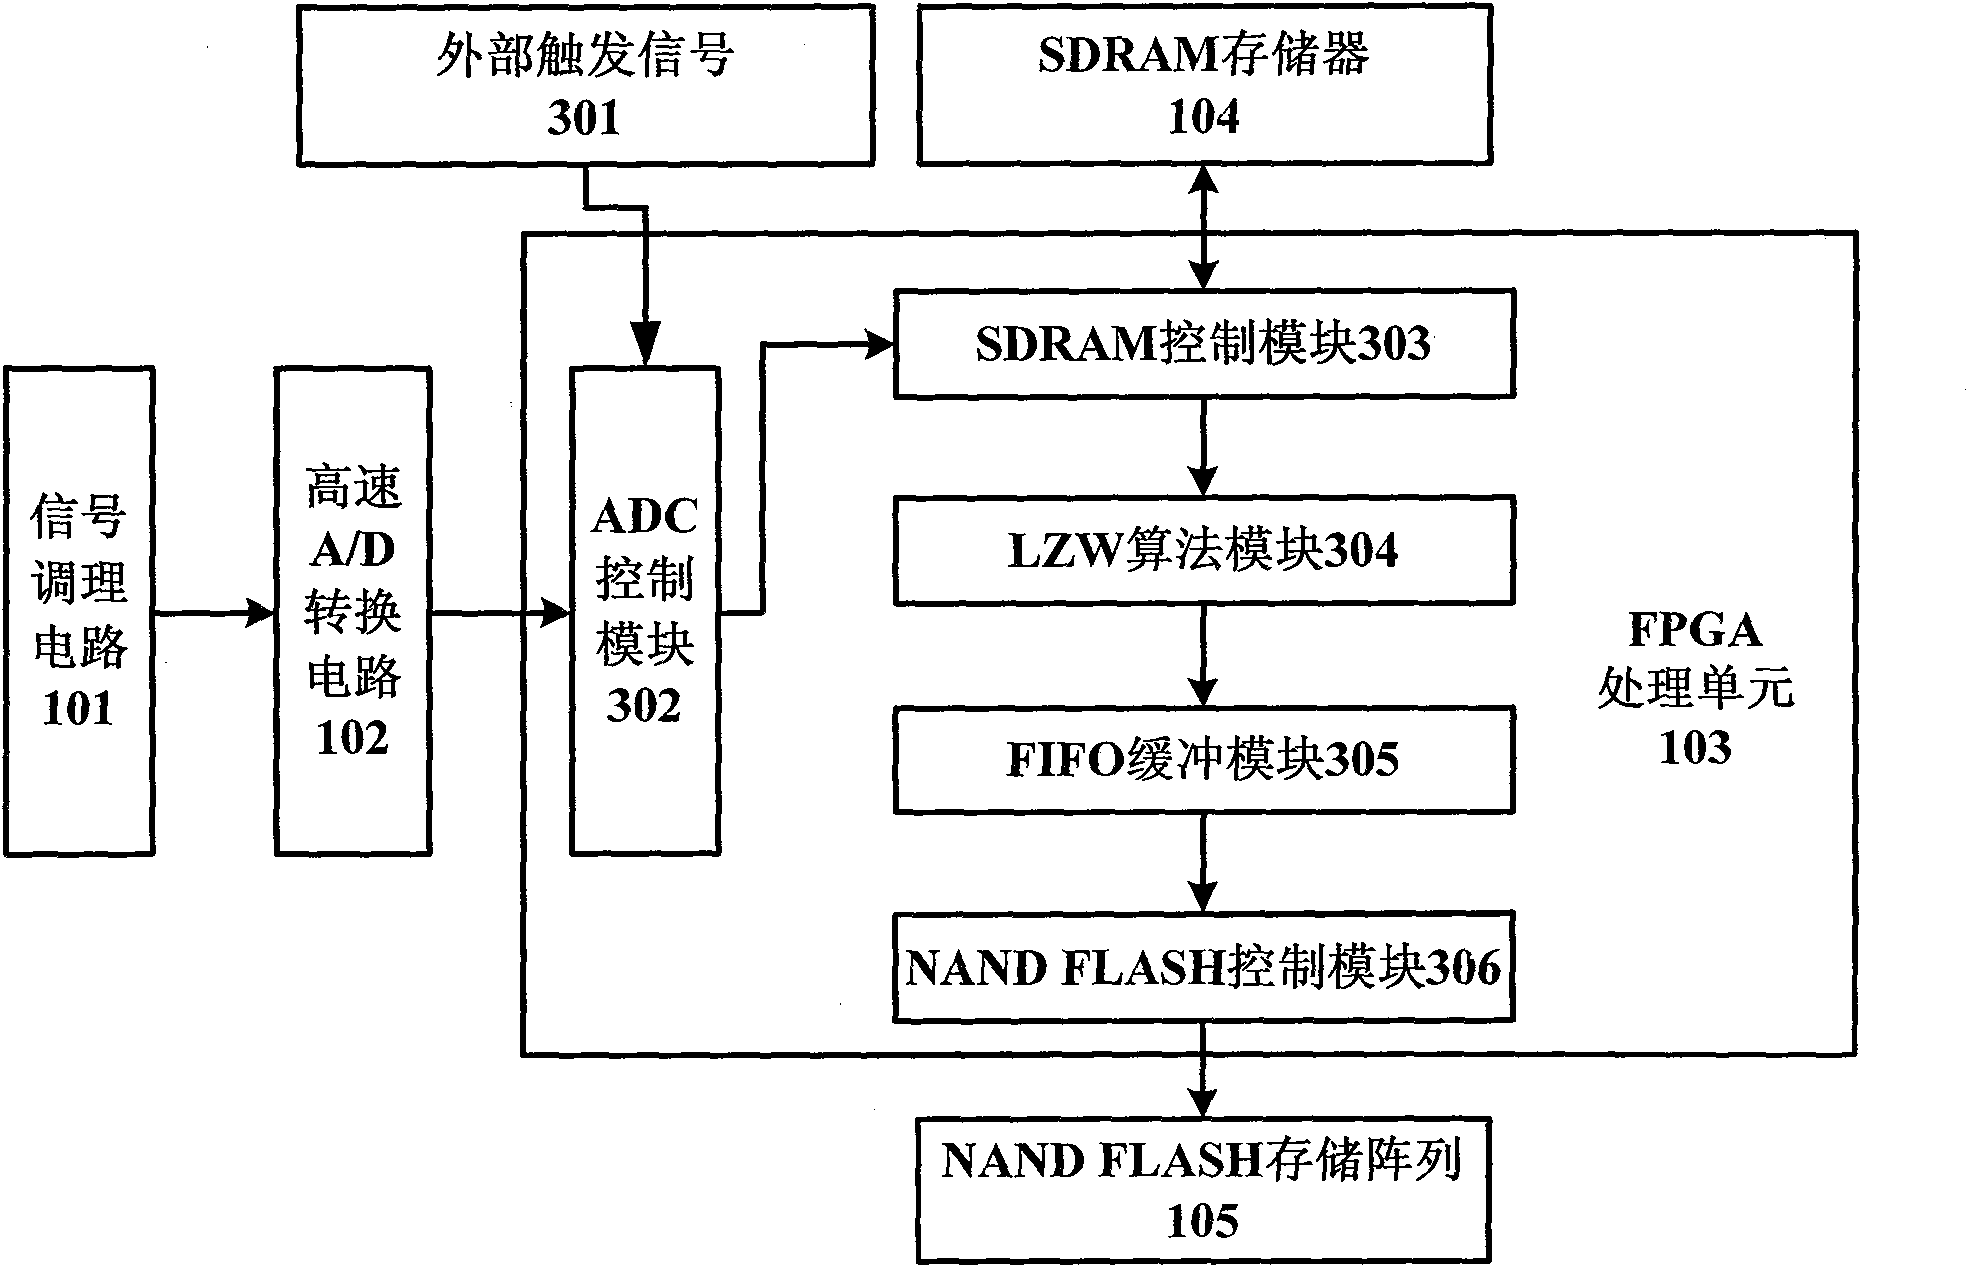 High-speed signal acquisition, storage and playback device based on FPGA